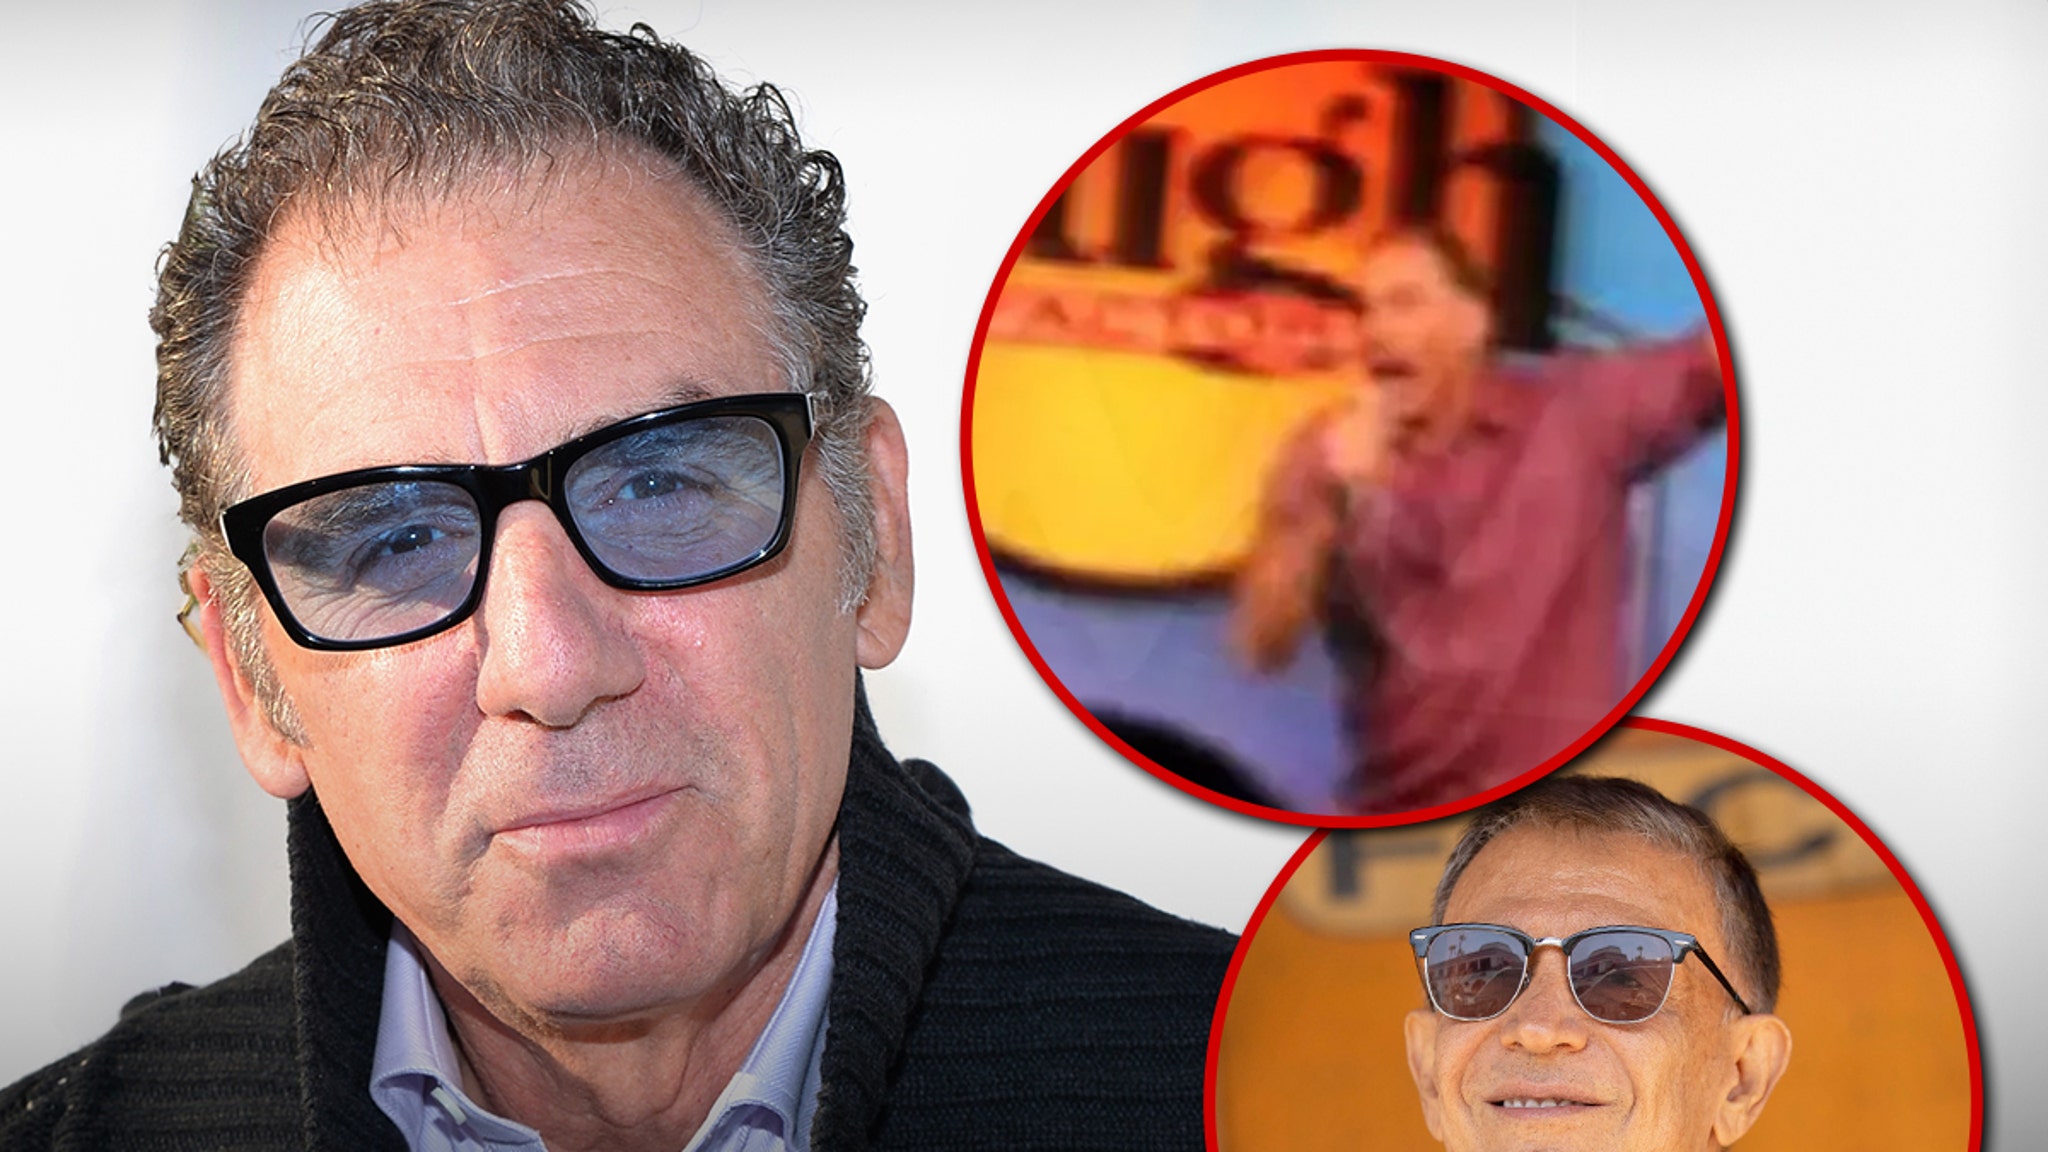 Laugh Factory Owner Says He’d Consider Lifting Michael Richards Ban